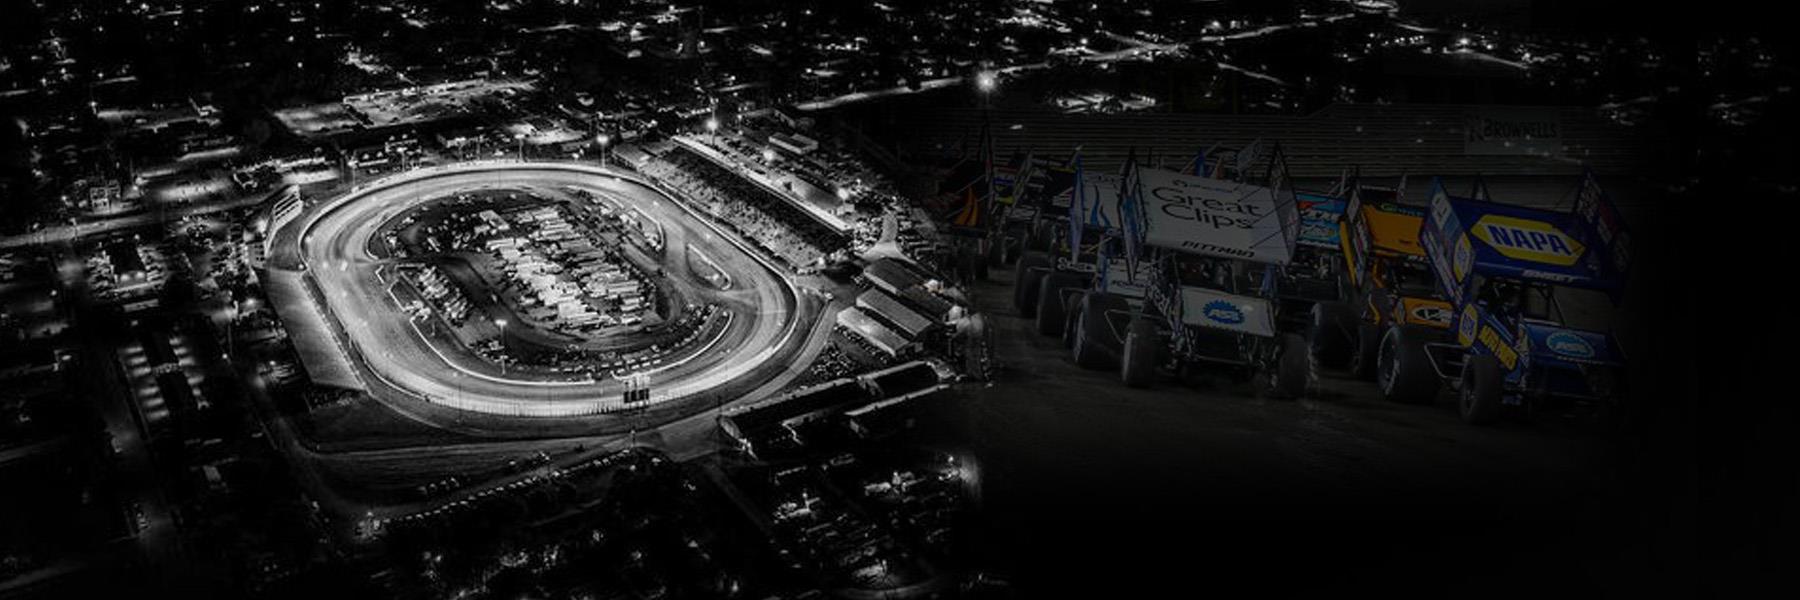 6/19/2021 - Knoxville Raceway